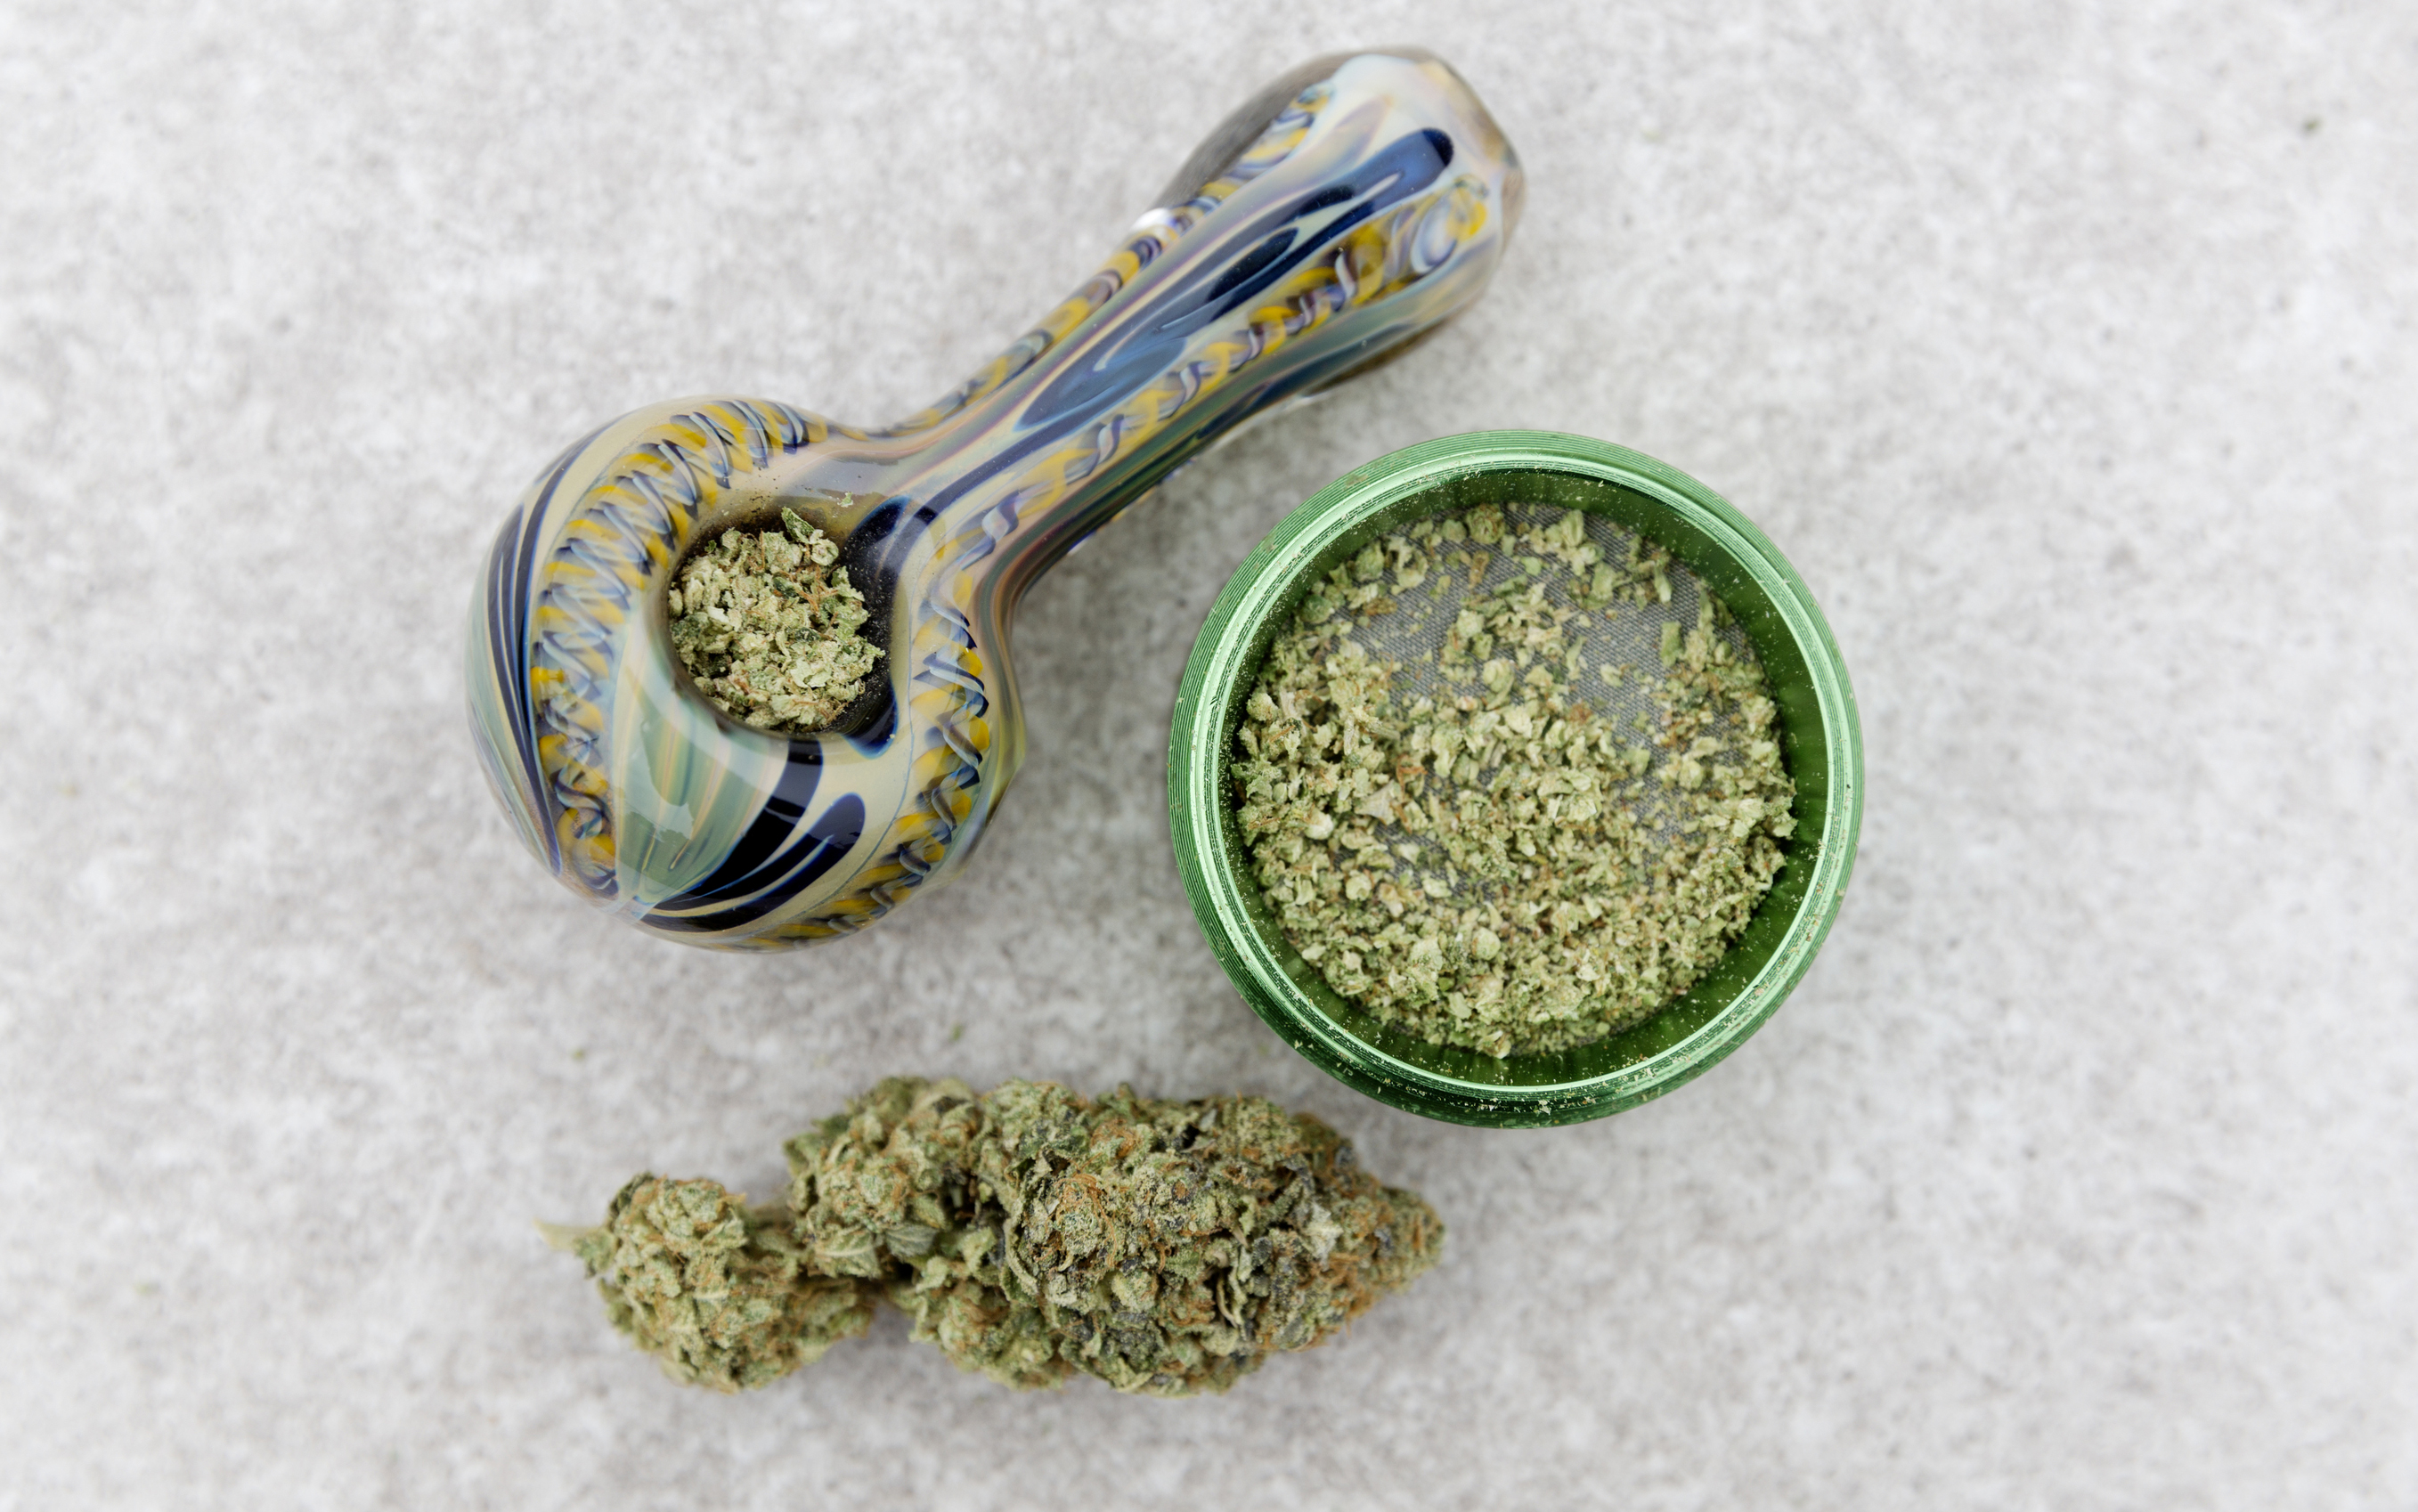 How to Use a Marijuana Pipe: 5 Easy Steps & Practices